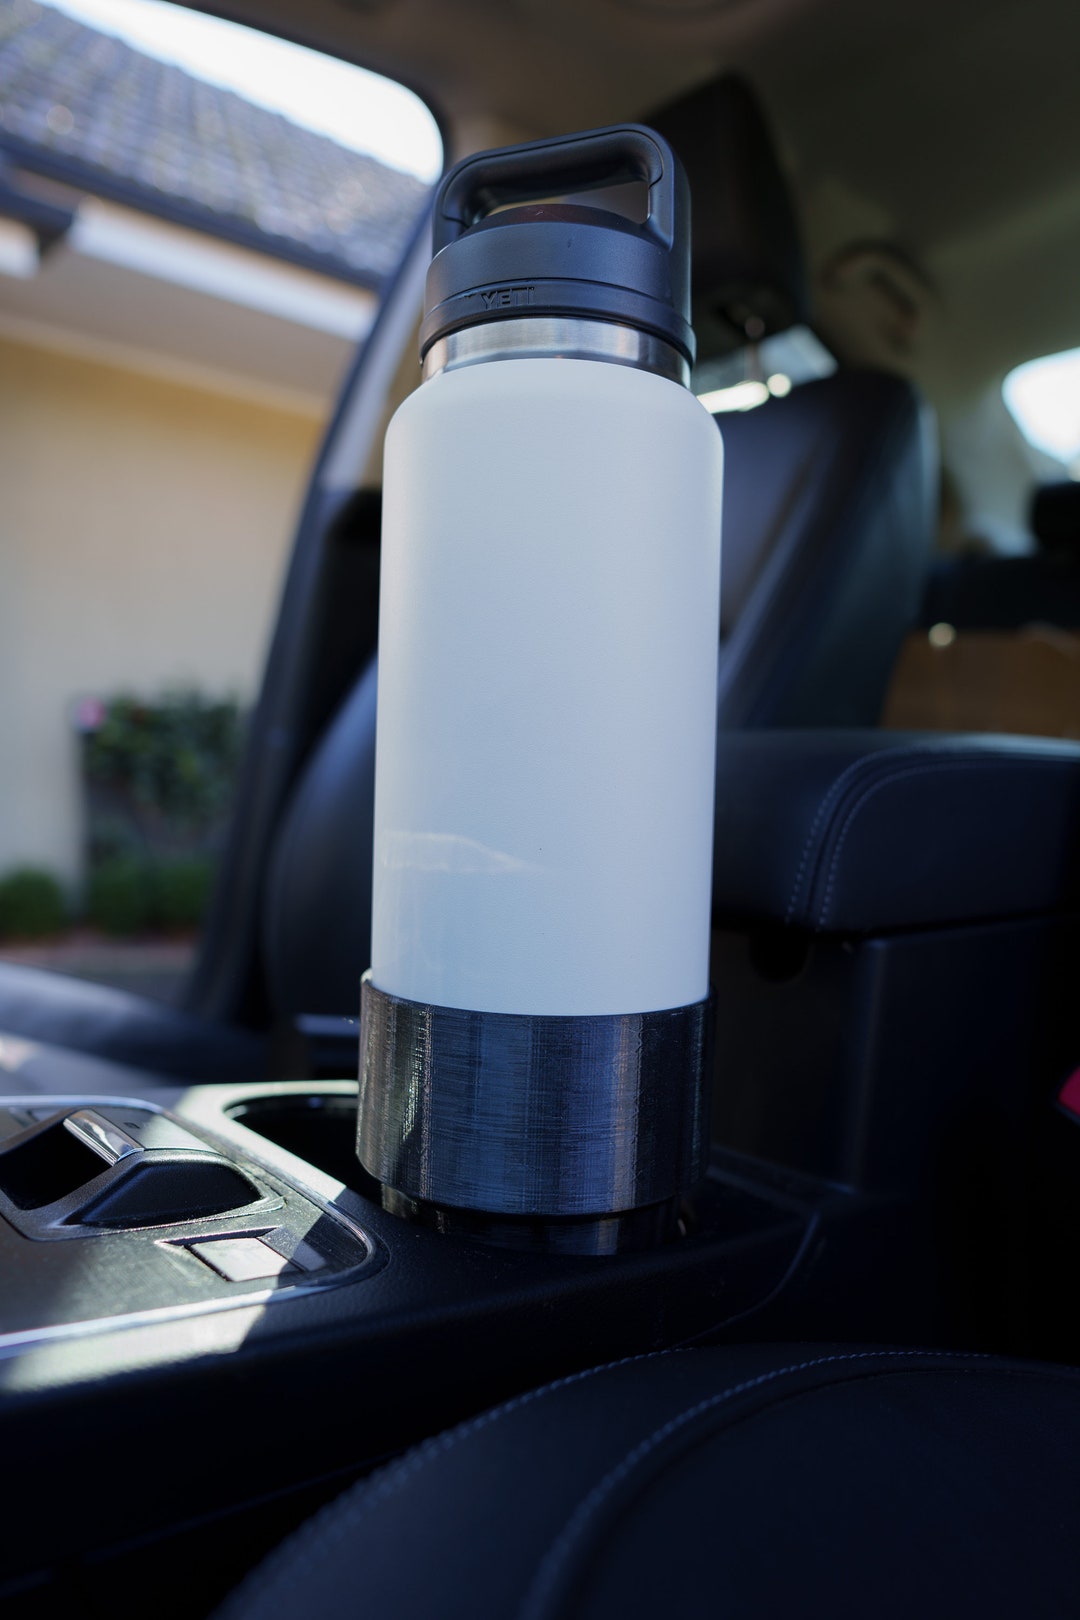 Yeti 46oz Bottle Car Adapter – Little Thoughts